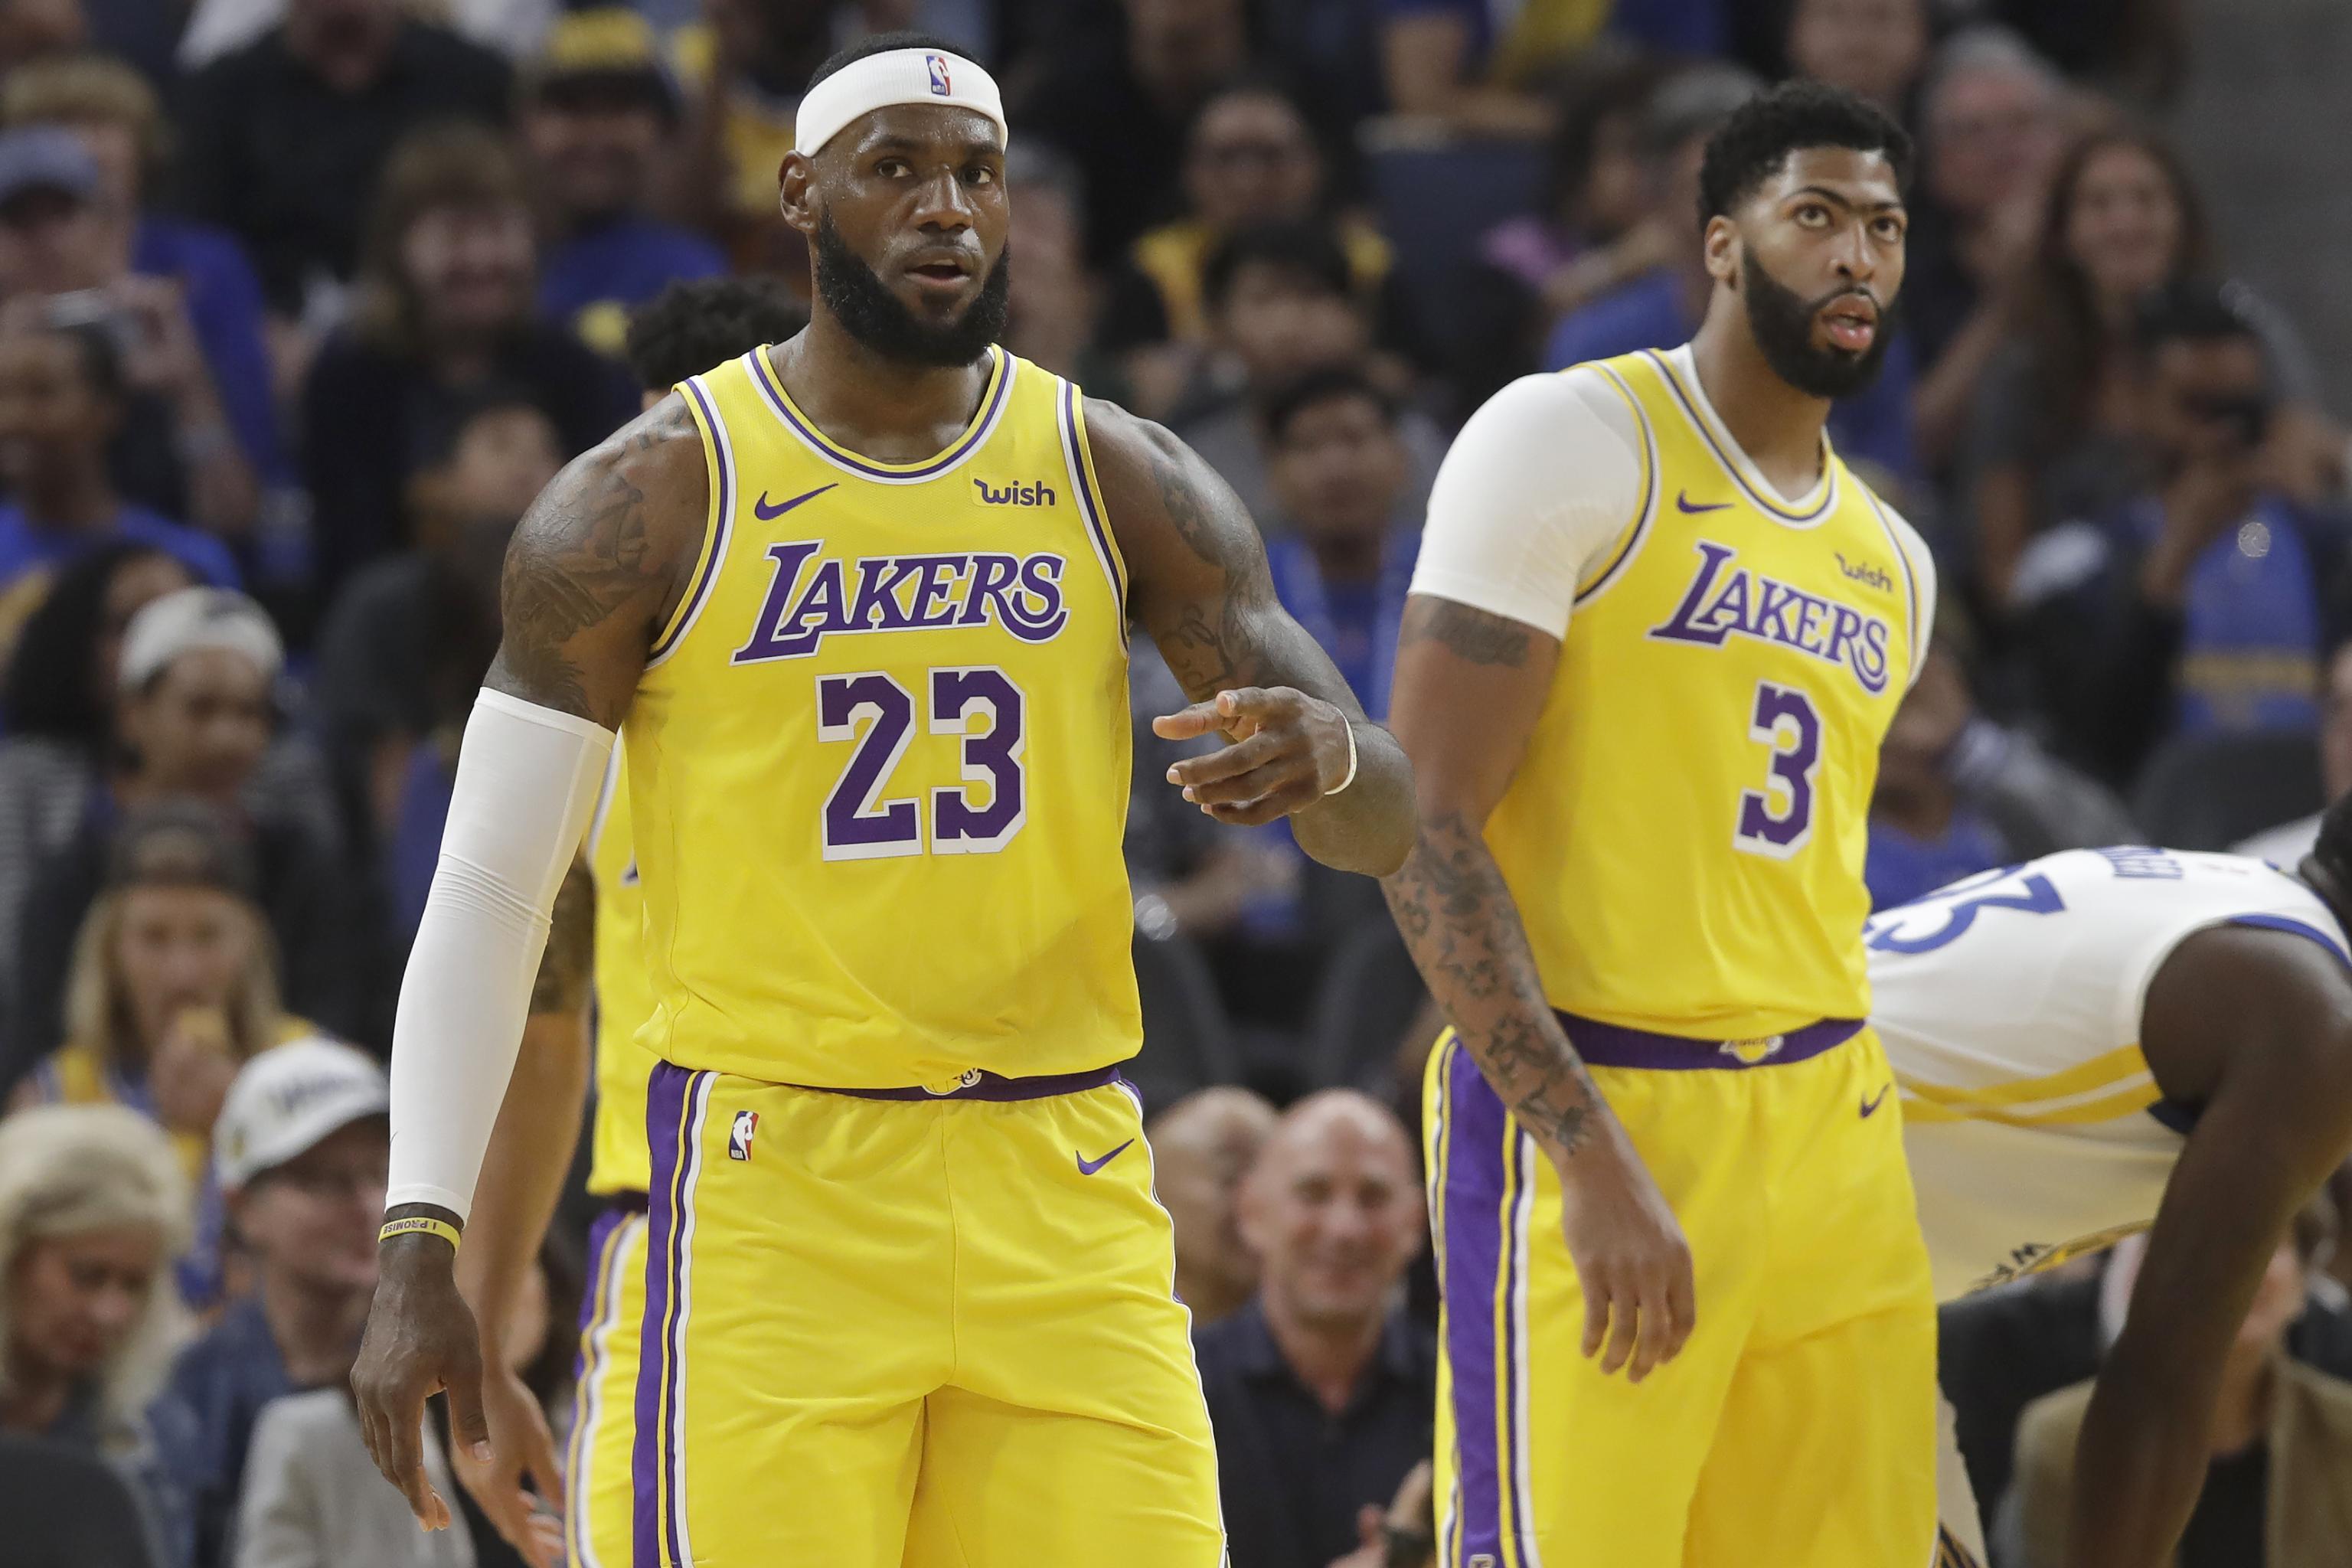 LeBron James' No. 23 Lakers Jersey Is Selling out